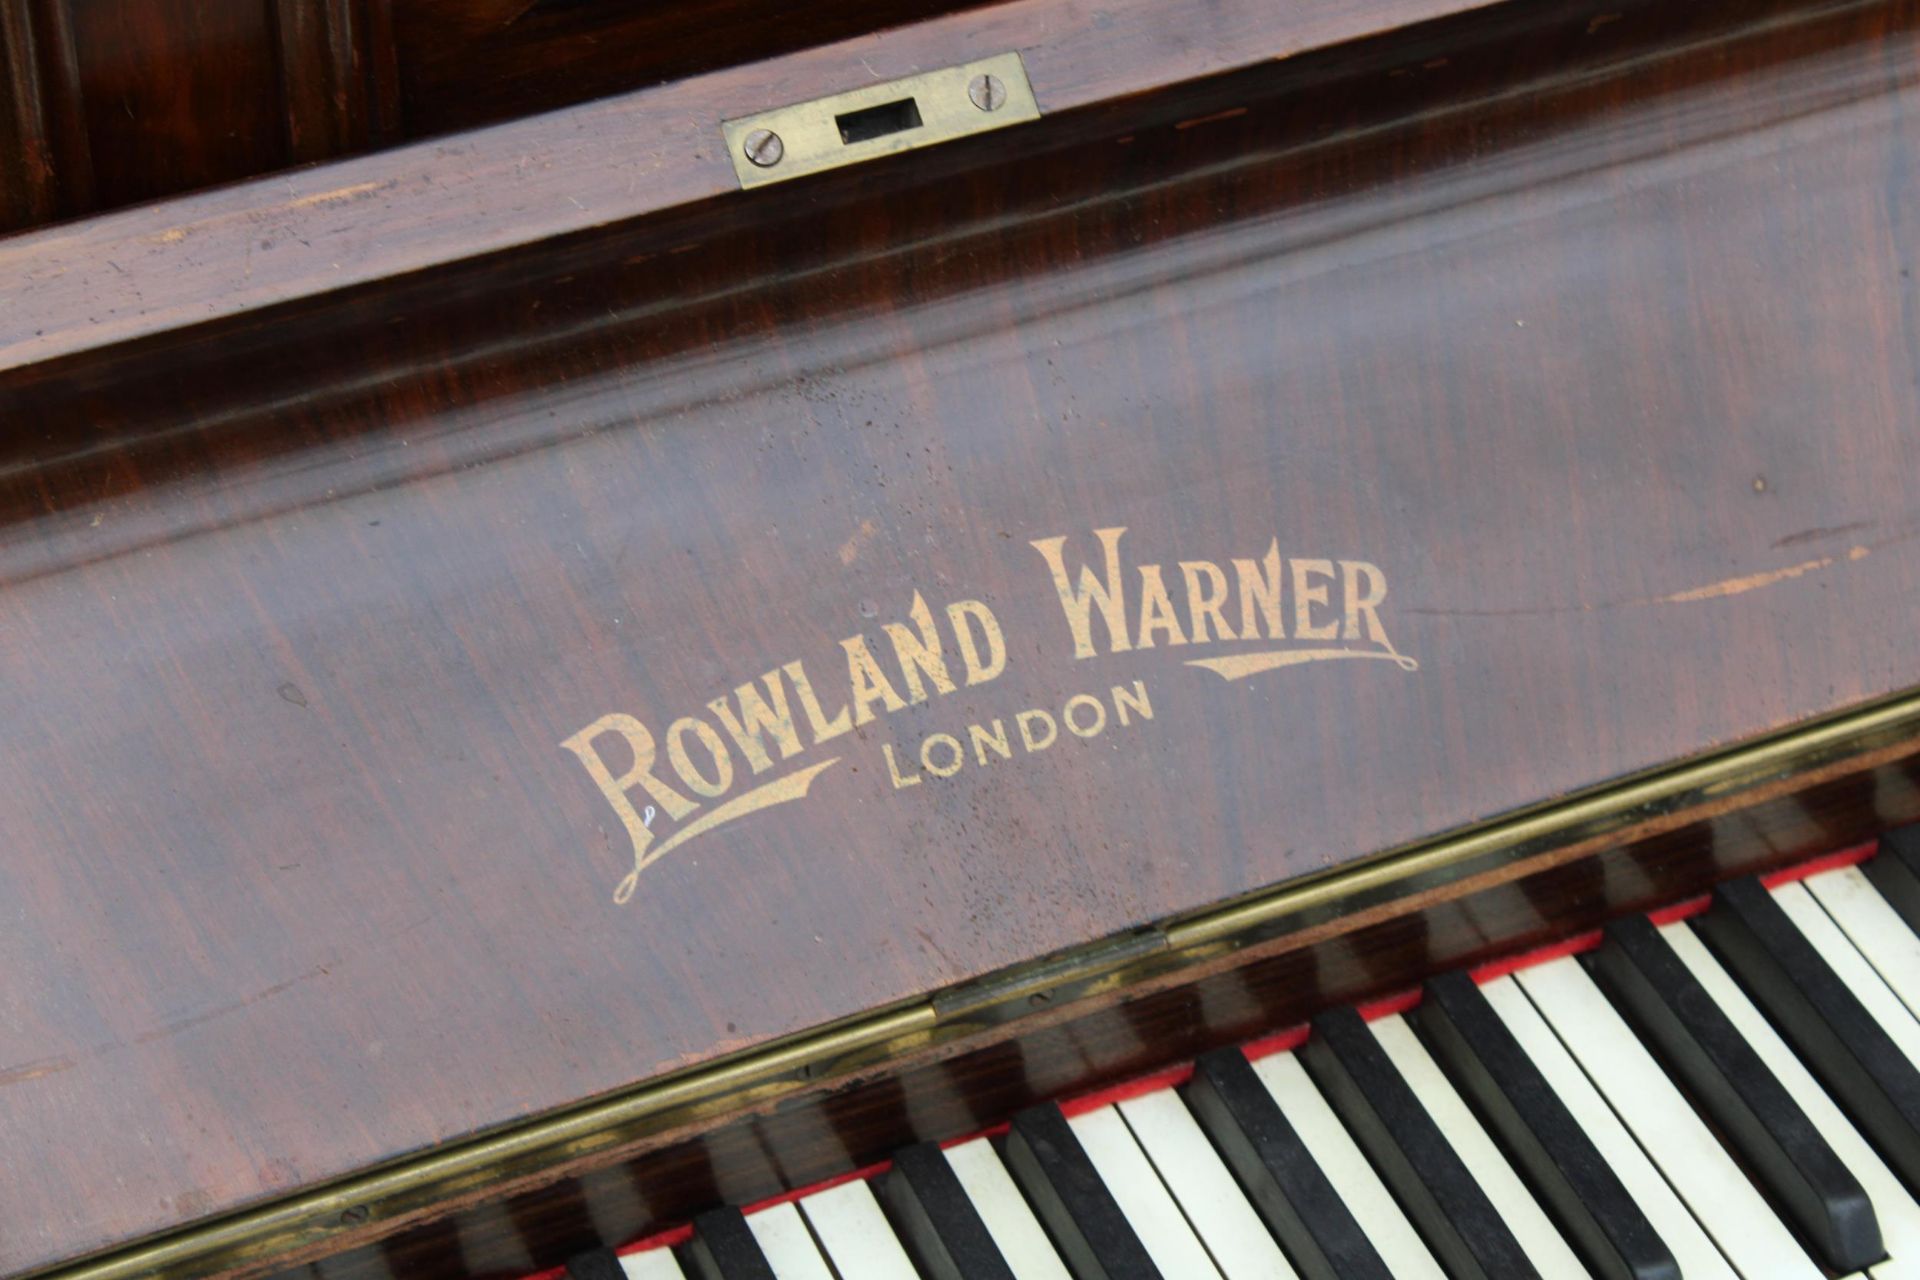 A ROLAND WARNER (LONDON) UPRIGHT PIANO - Image 4 of 5